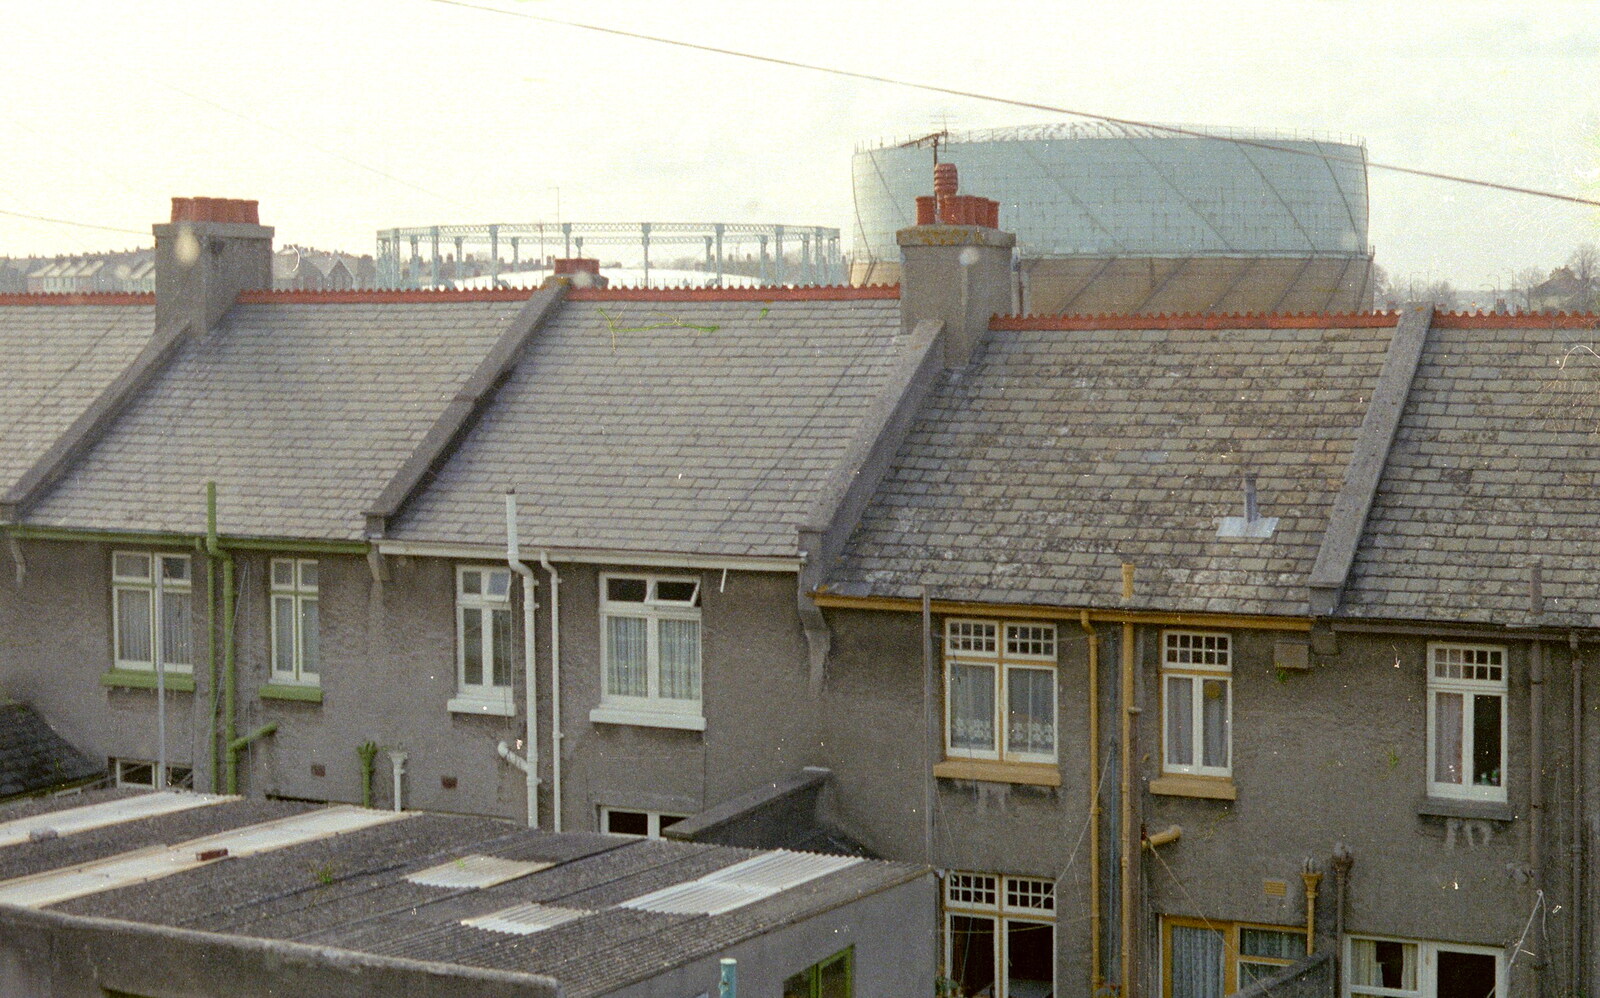 A view of Plymouth gasometers from the bedroom from Uni: A Central Park Fair and City Street Life, Plymouth - 20th October 1985